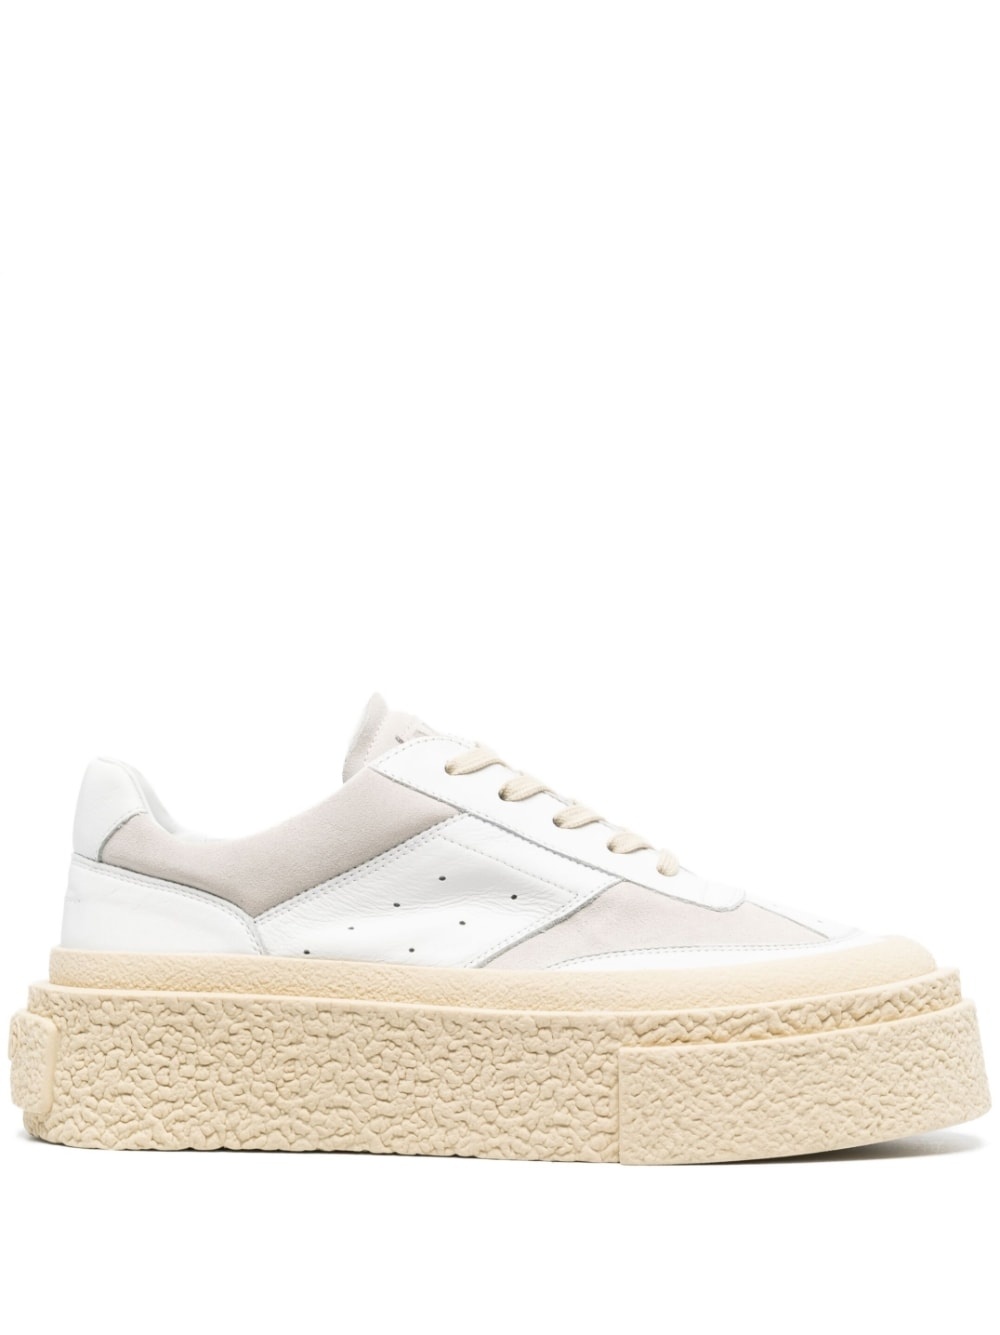 perforated-detail flatform leather sneakers - 1